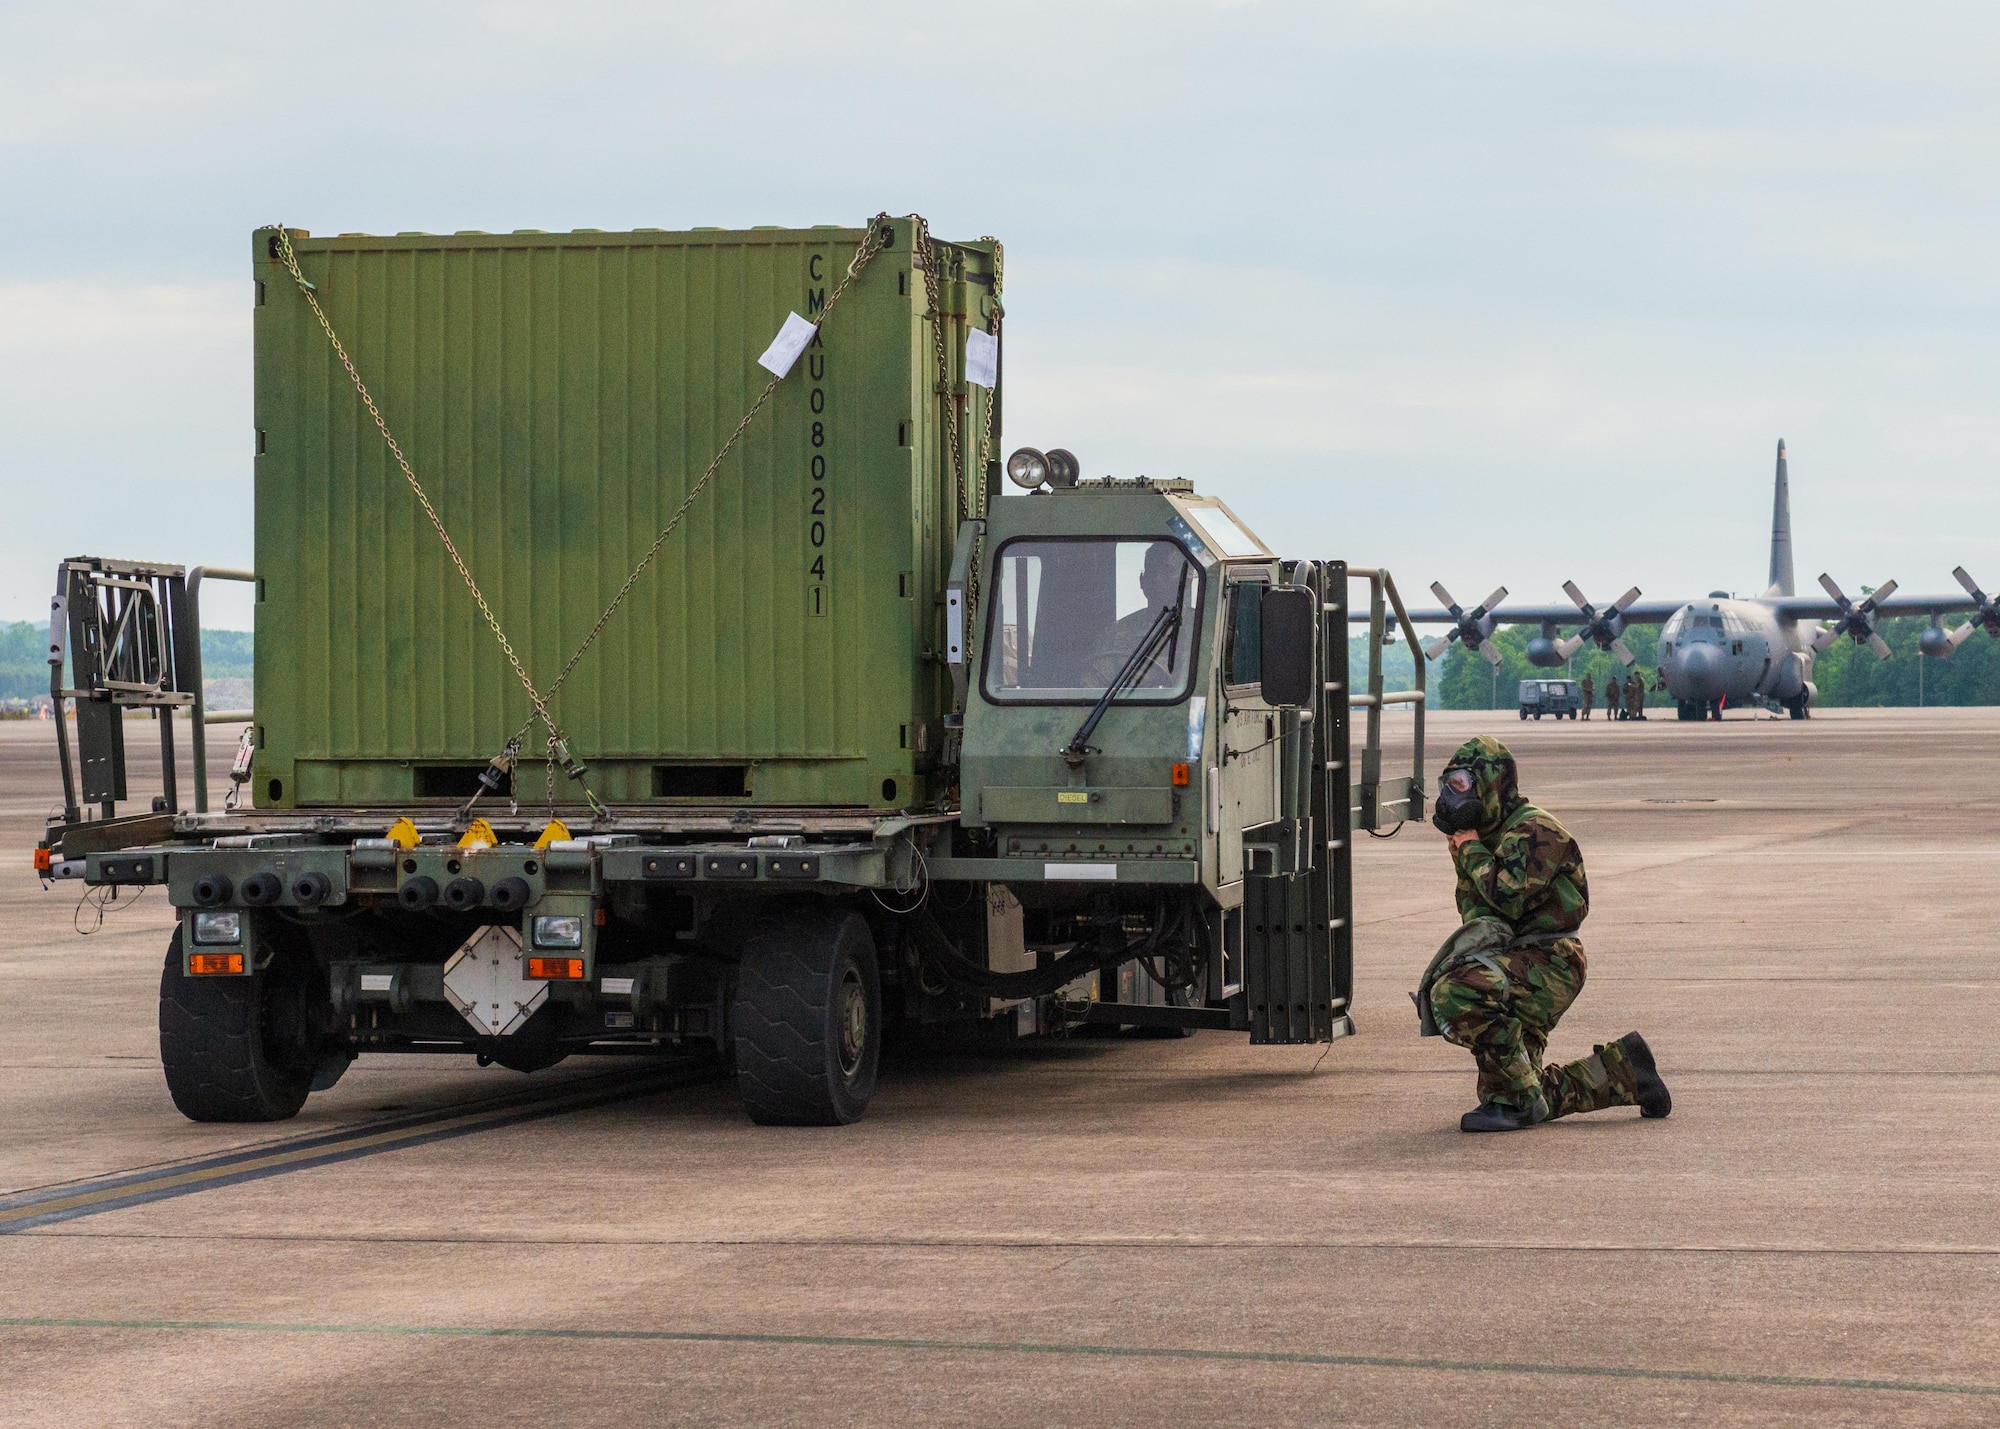 An Airman spots and guides large equipment being loaded onto aircraft while in personal protective equipment at Little Rock Air Force Base, Arkansas, June 5, 2021. ‘Port Dawgs’ from the 189th Aerial Port Flight, Air National Guard, and from the 96th Aerial Port Squadron, Air Force Reserve, created a joint training event focused on aerial port operations at Little Rock Air Force Base, Arkansas, June 3-6, 2021. (U.S. Air Force photo by Senior Airman Julia Ford)